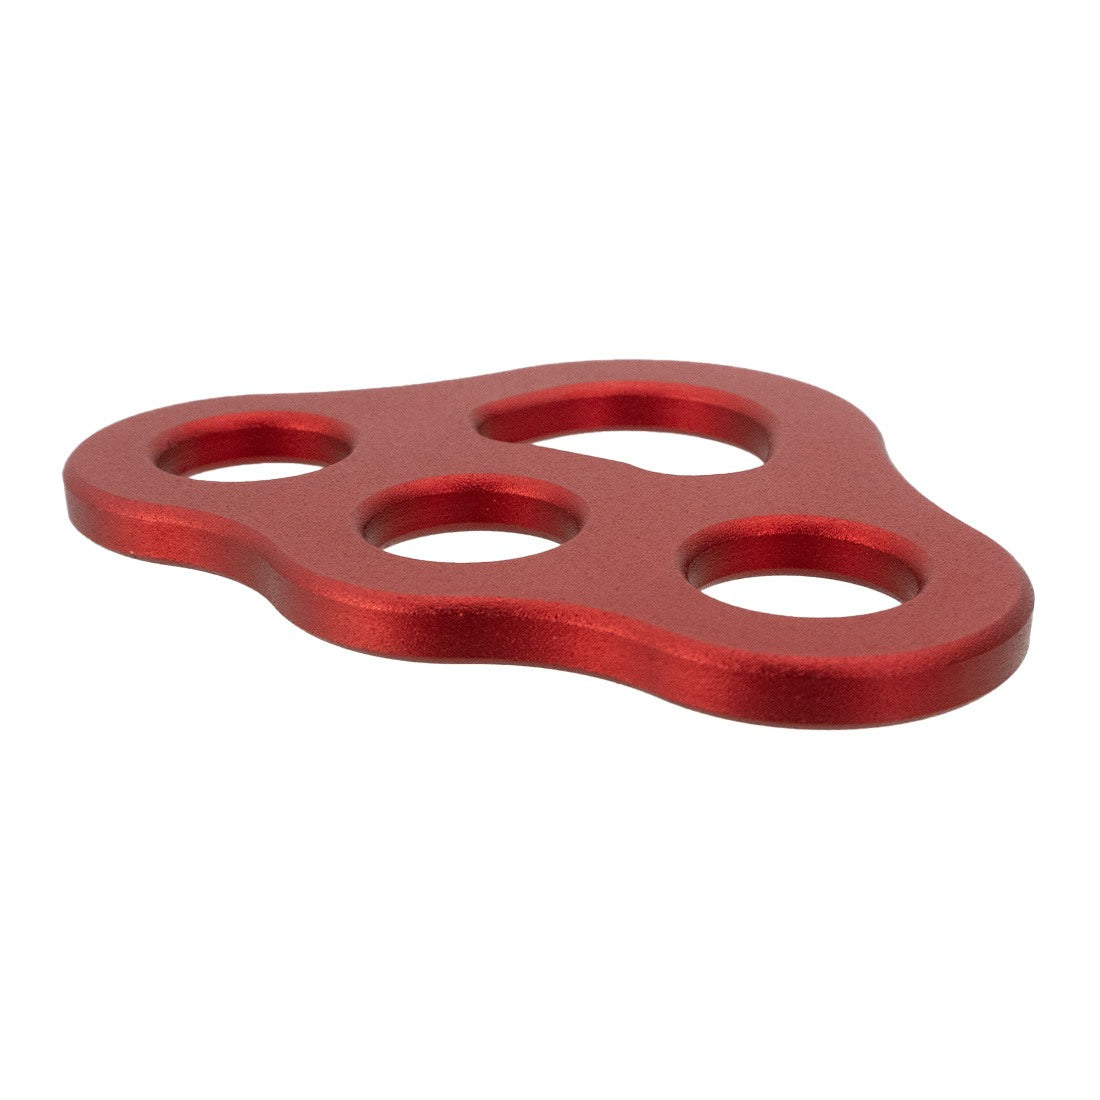 Petzl PAW Rigging Plate Side View